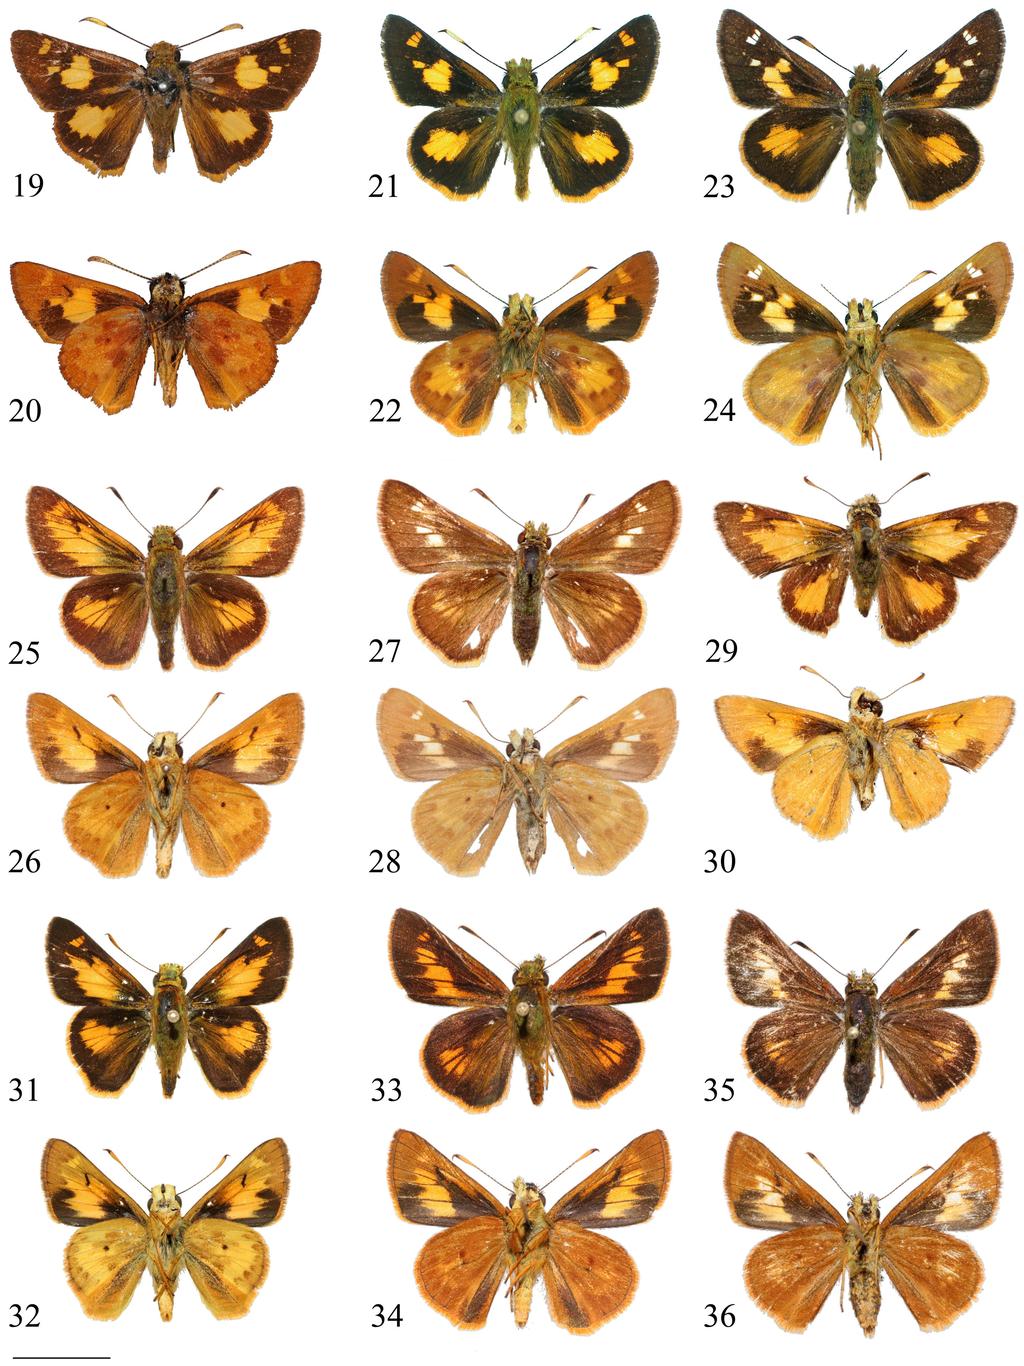 NEW GENUS AND NEW SPECIES OF HESPERIIDAE INSECTA MUNDI 0089, July 2009 19 Figure 19-36. Buzyges (full data in text; ds = dorsal surface, vs = ventral surface; scale bar = 10 mm). 19) B.